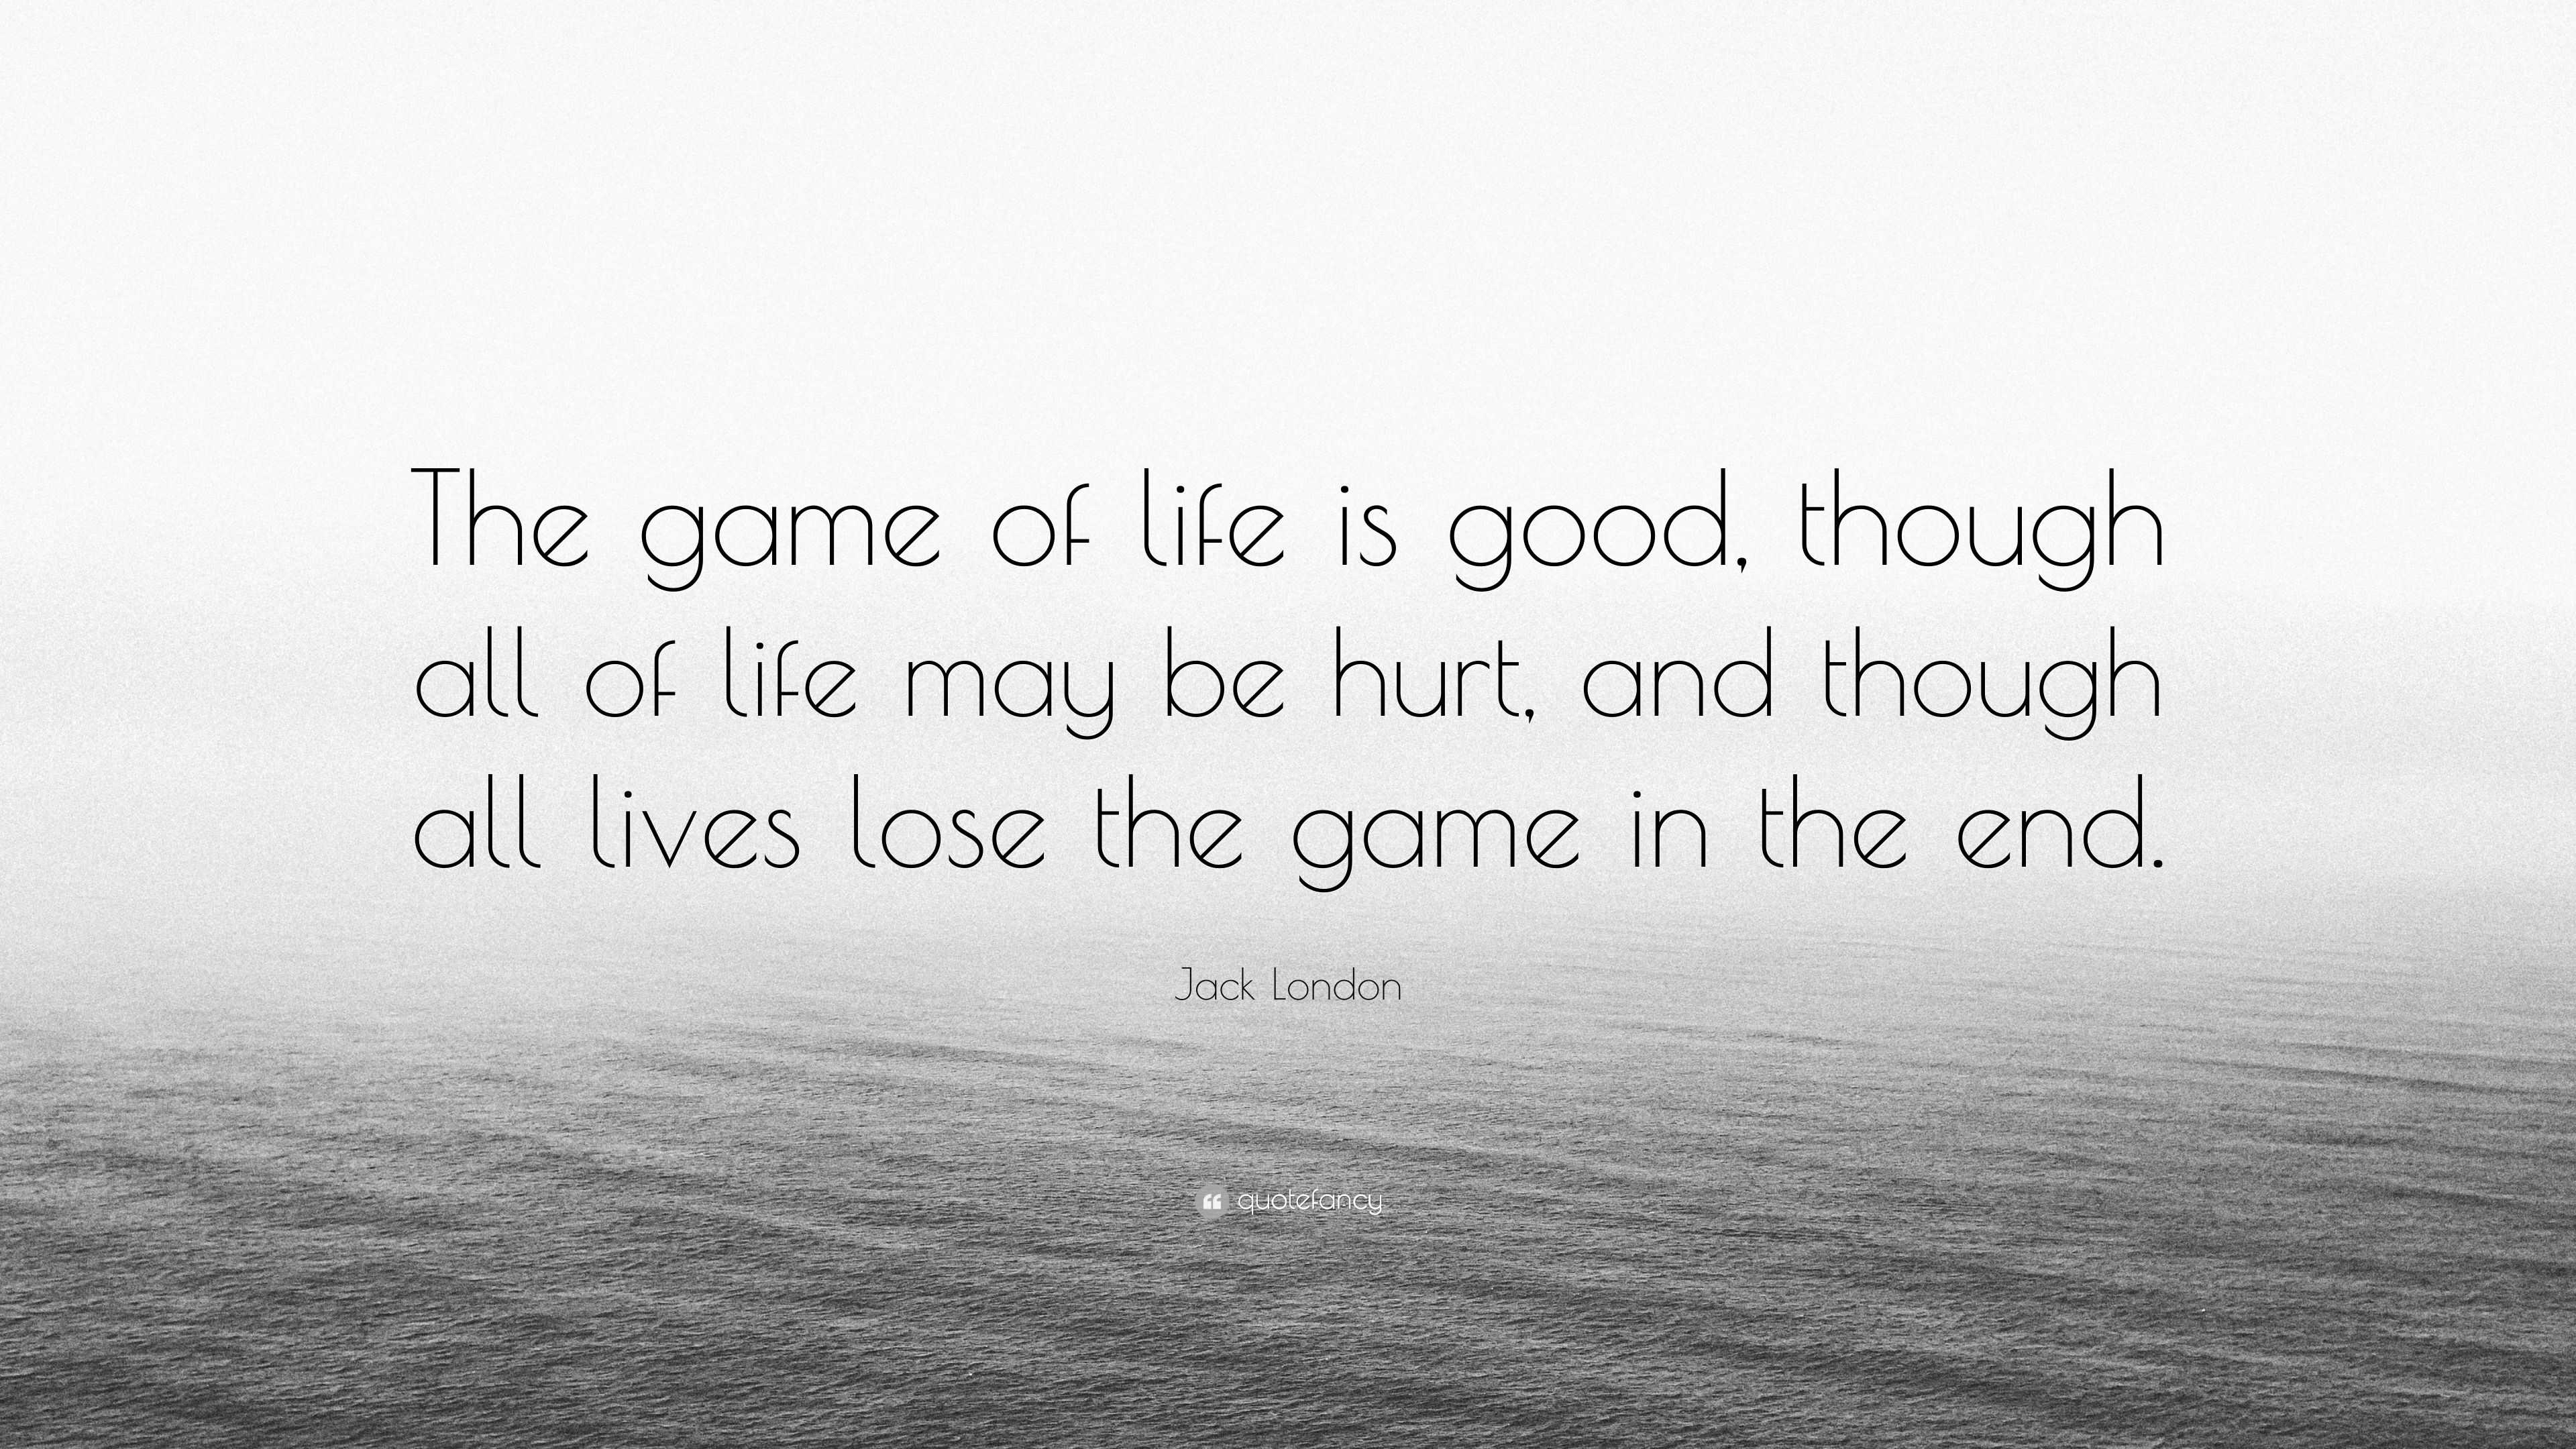 Jack London Quote “The game of life is good though all of life